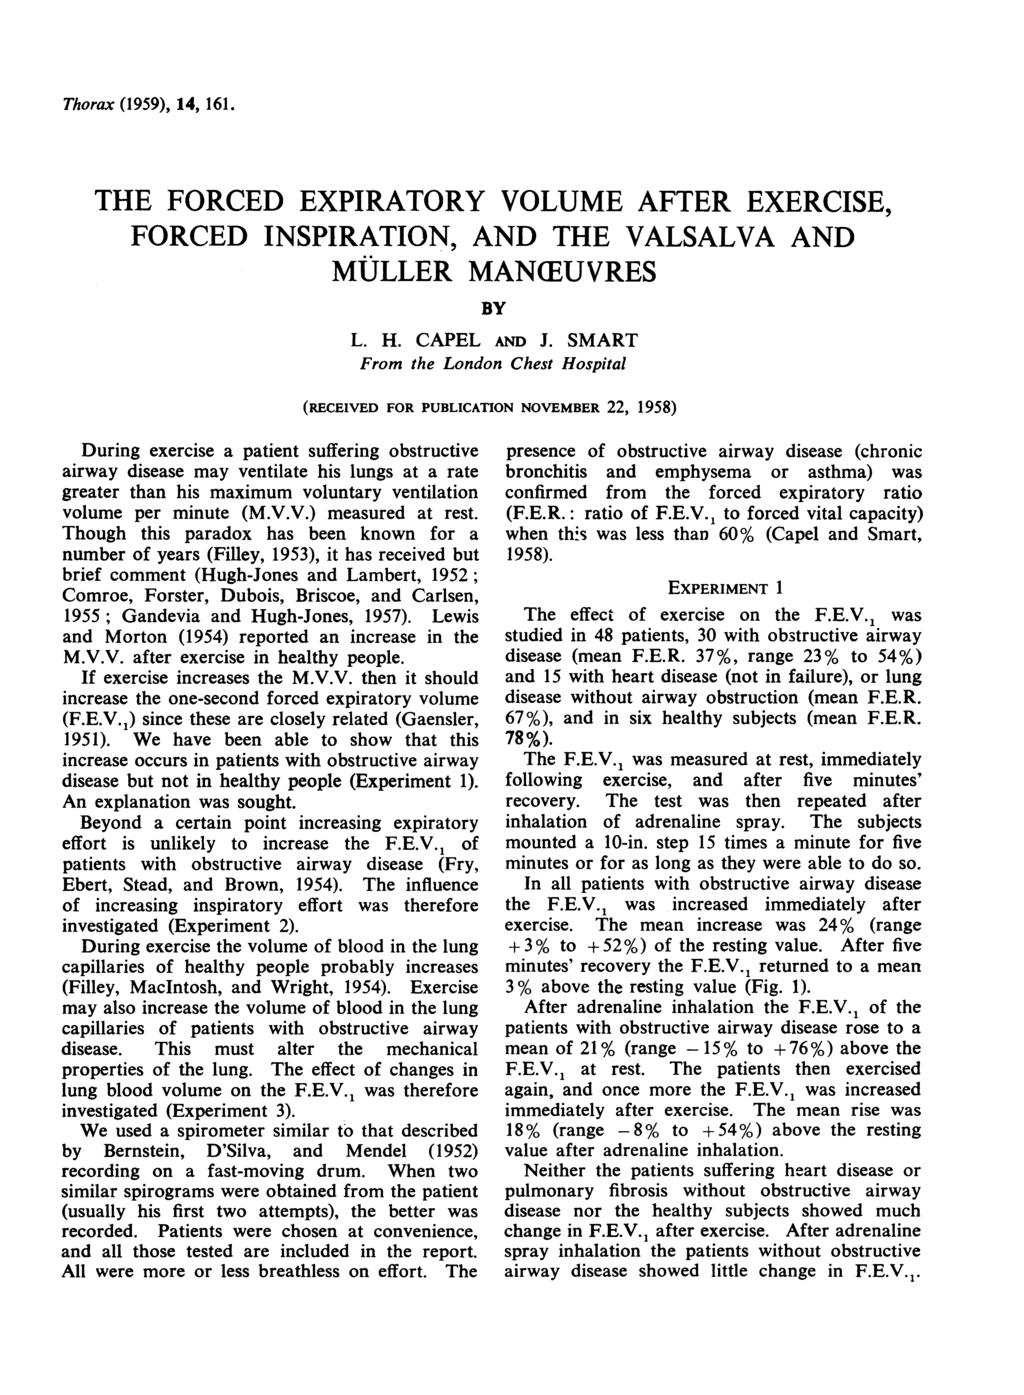 Thorax (1959), 14, 161. THE FORCED EXPIRATORY VOLUME AFTER EXERCISE, FORCED INSPIRATION, AND THE VALSALVA AND MULLER MAN(EUVRES BY L. H. CAPEL AND J.